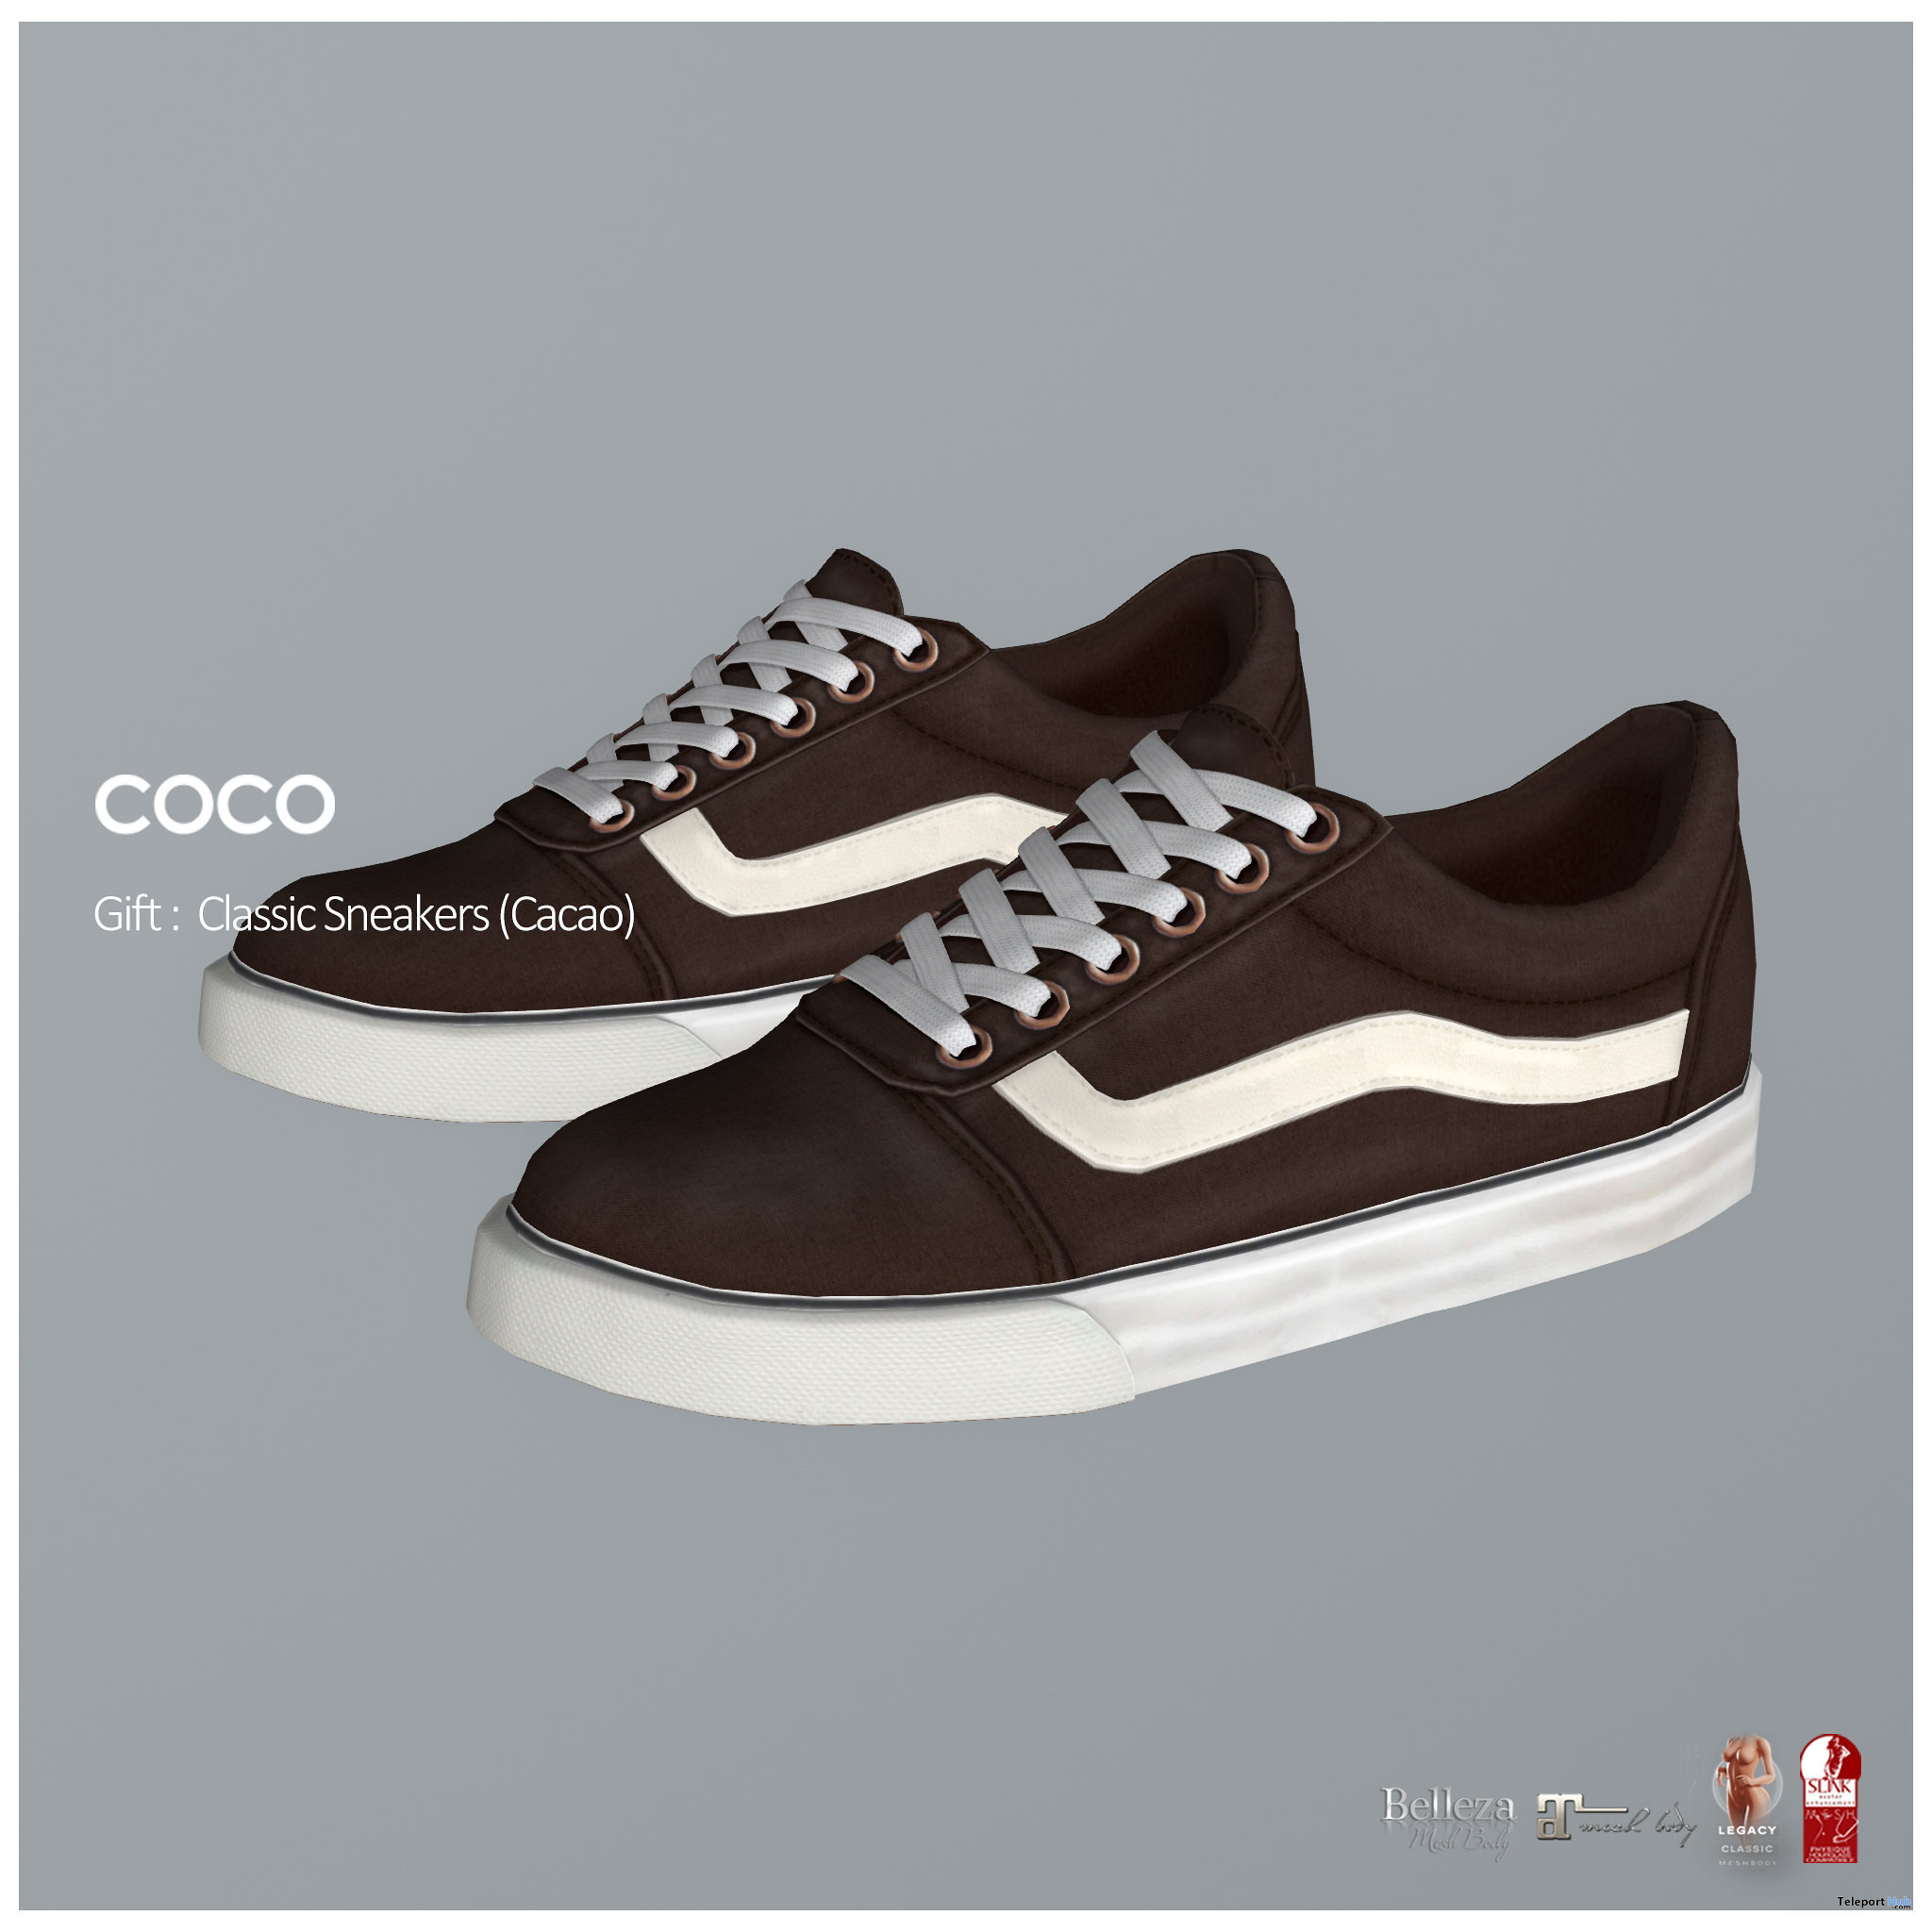 Classic Sneakers Cacao November 2022 Group Gift by COCO Designs - Teleport Hub - teleporthub.com